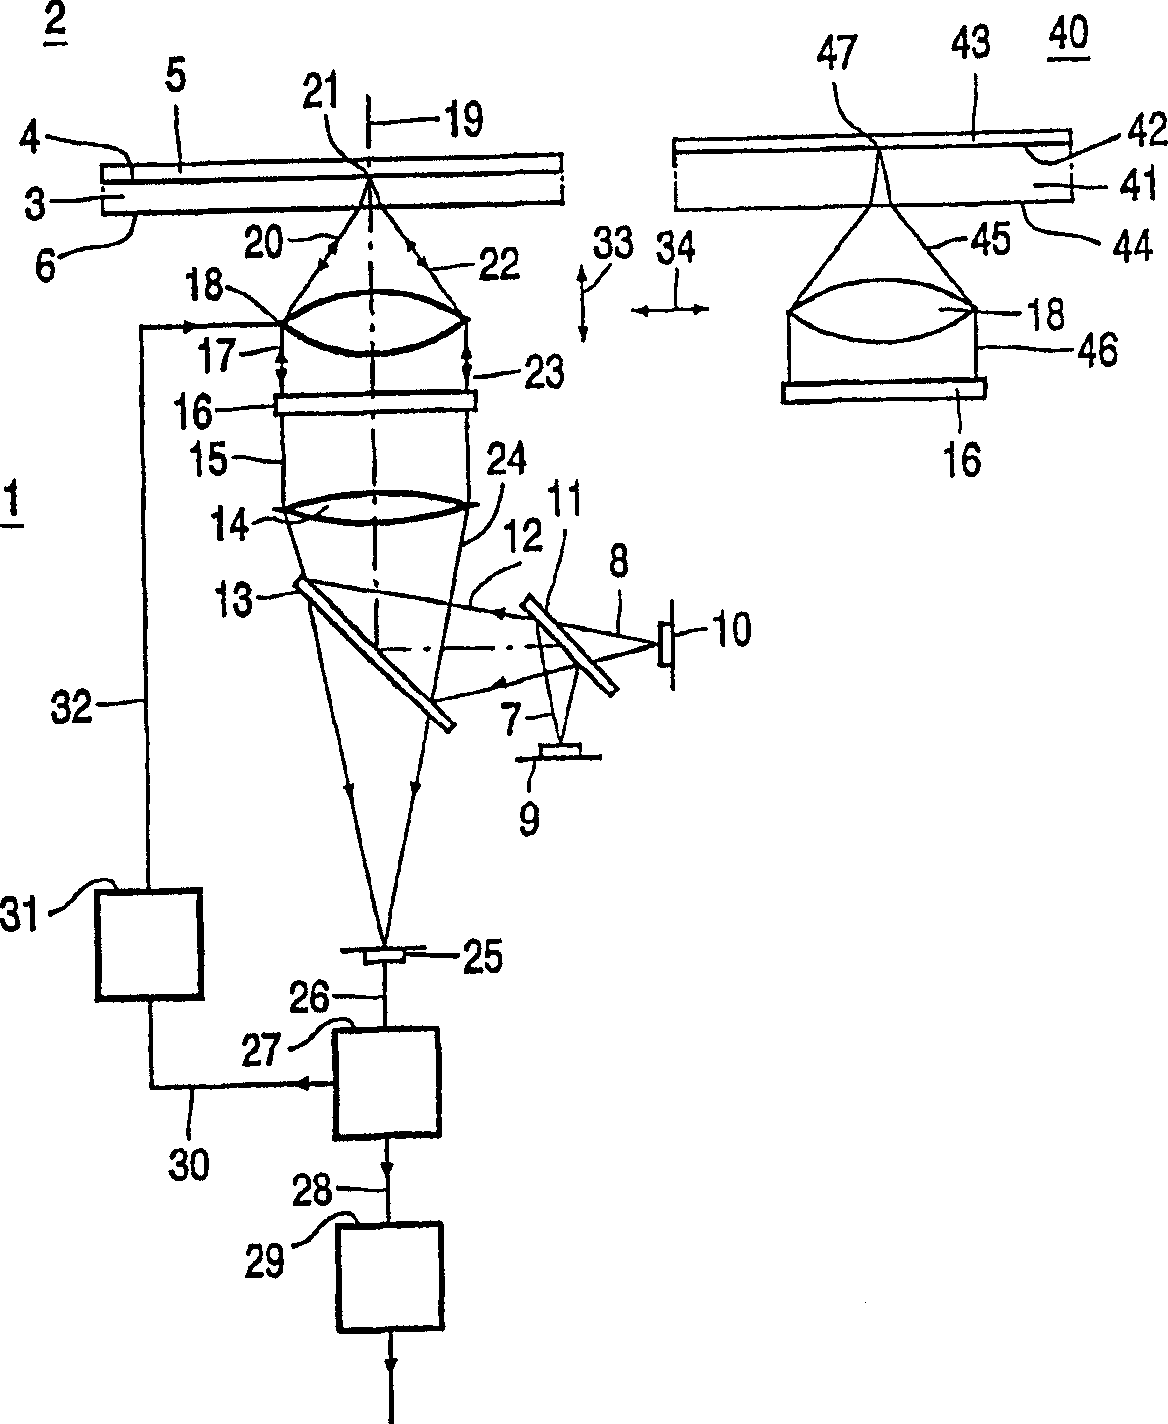 Optical head for scanning record carrier